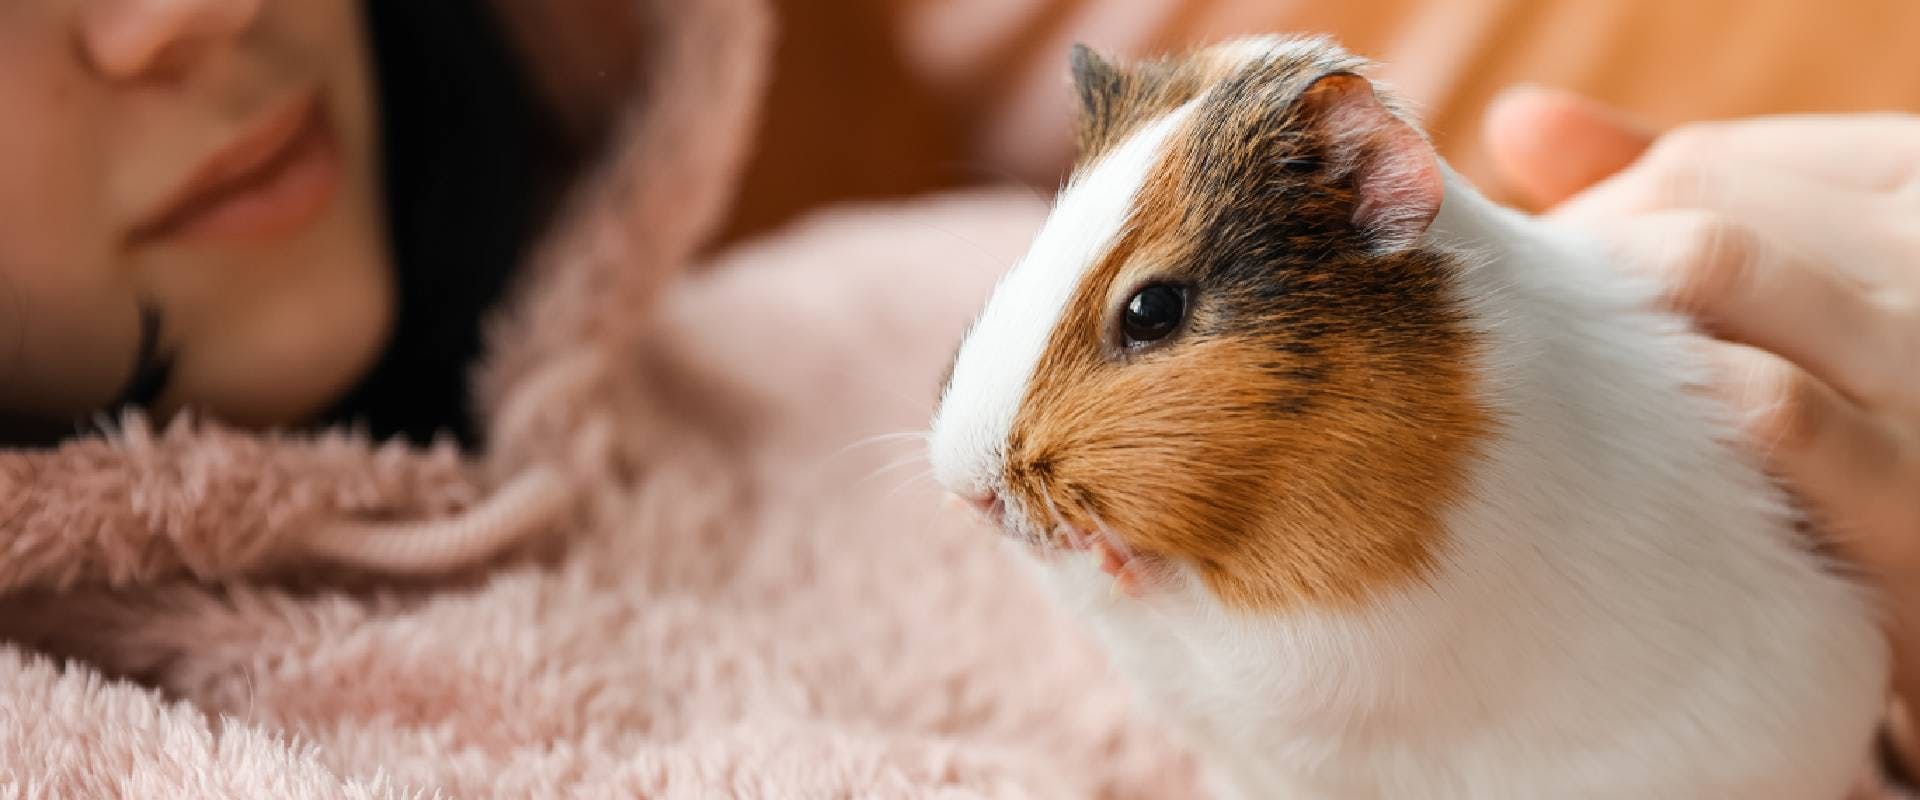 Guinea pig resting on someone's chest